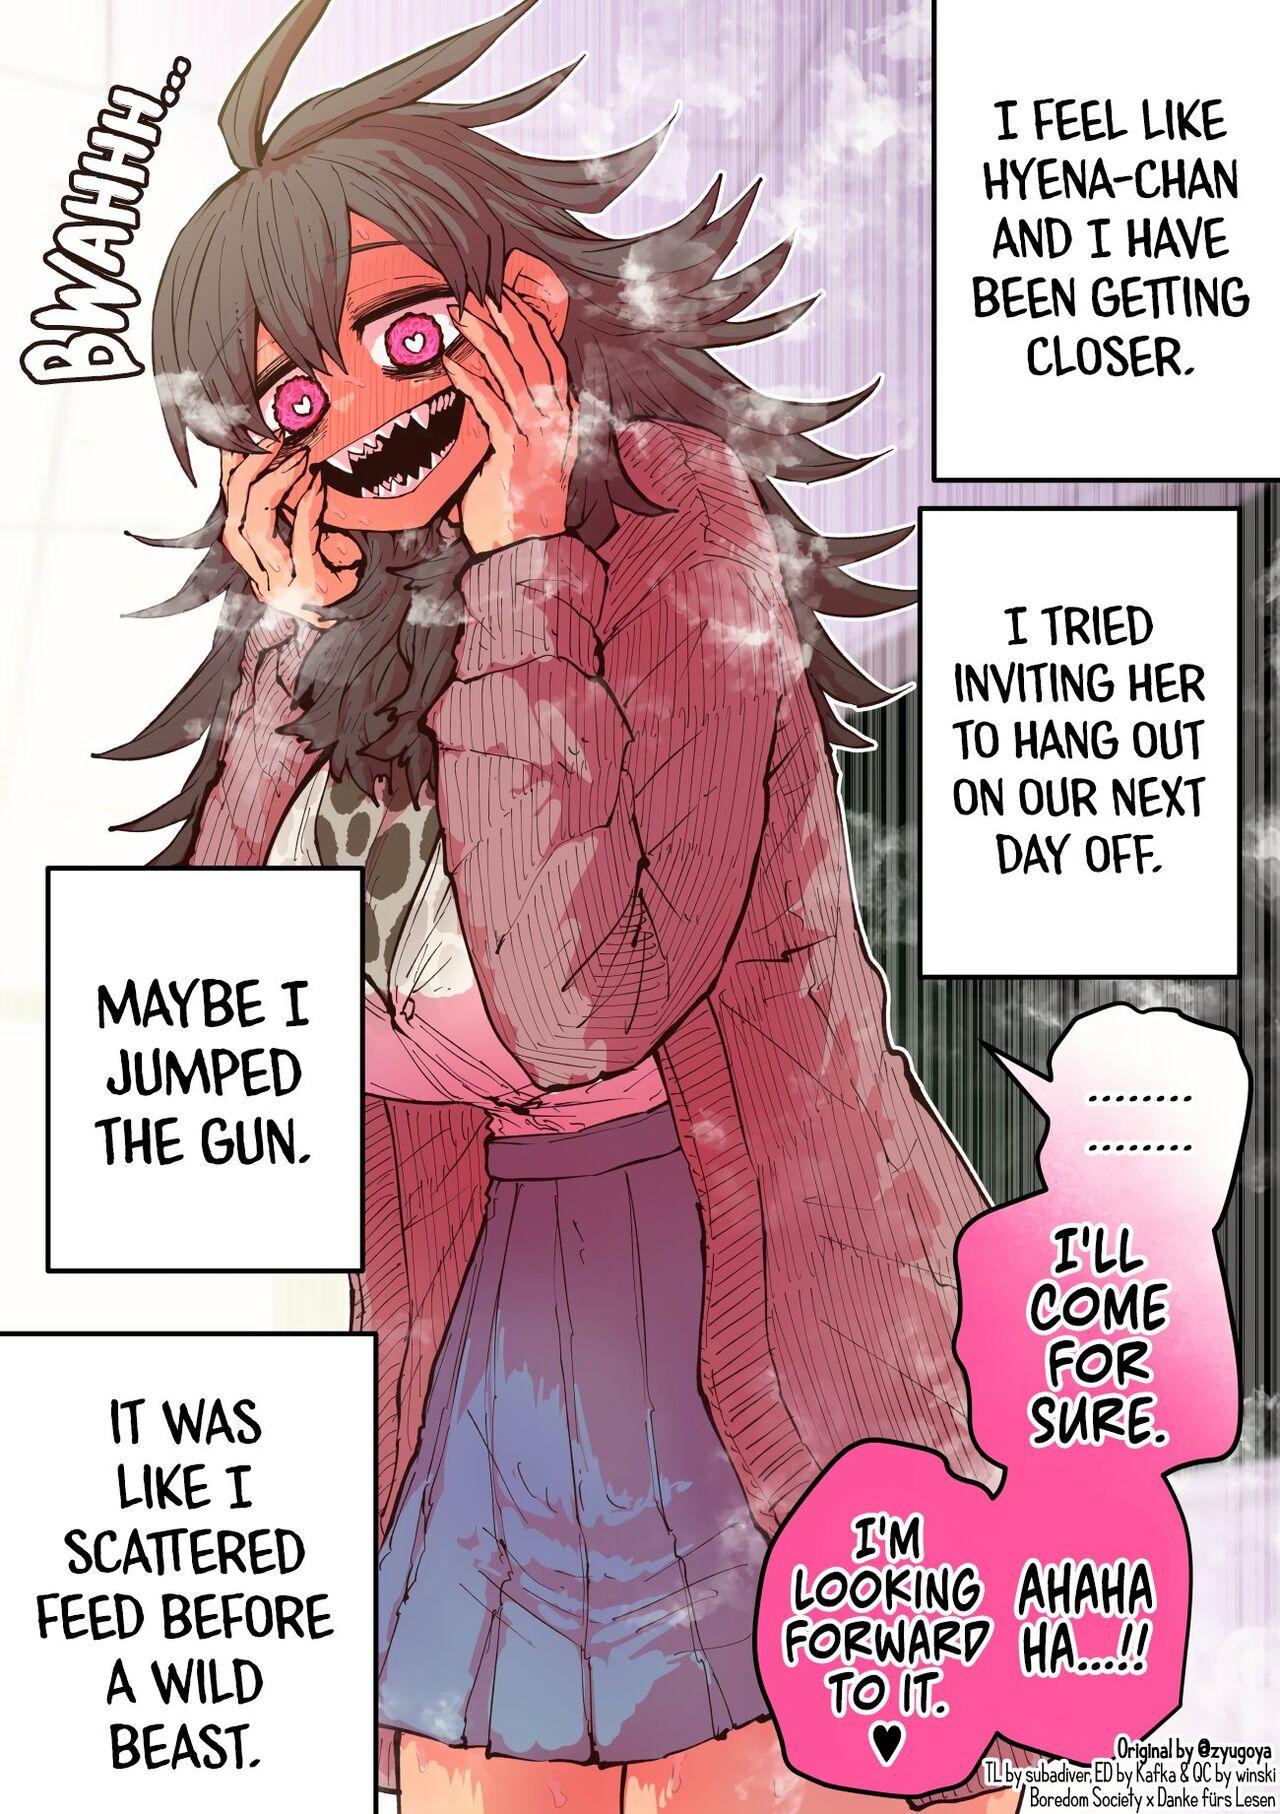 Young Old Being Targeted by Hyena-chan - Original Bondagesex - Page 7